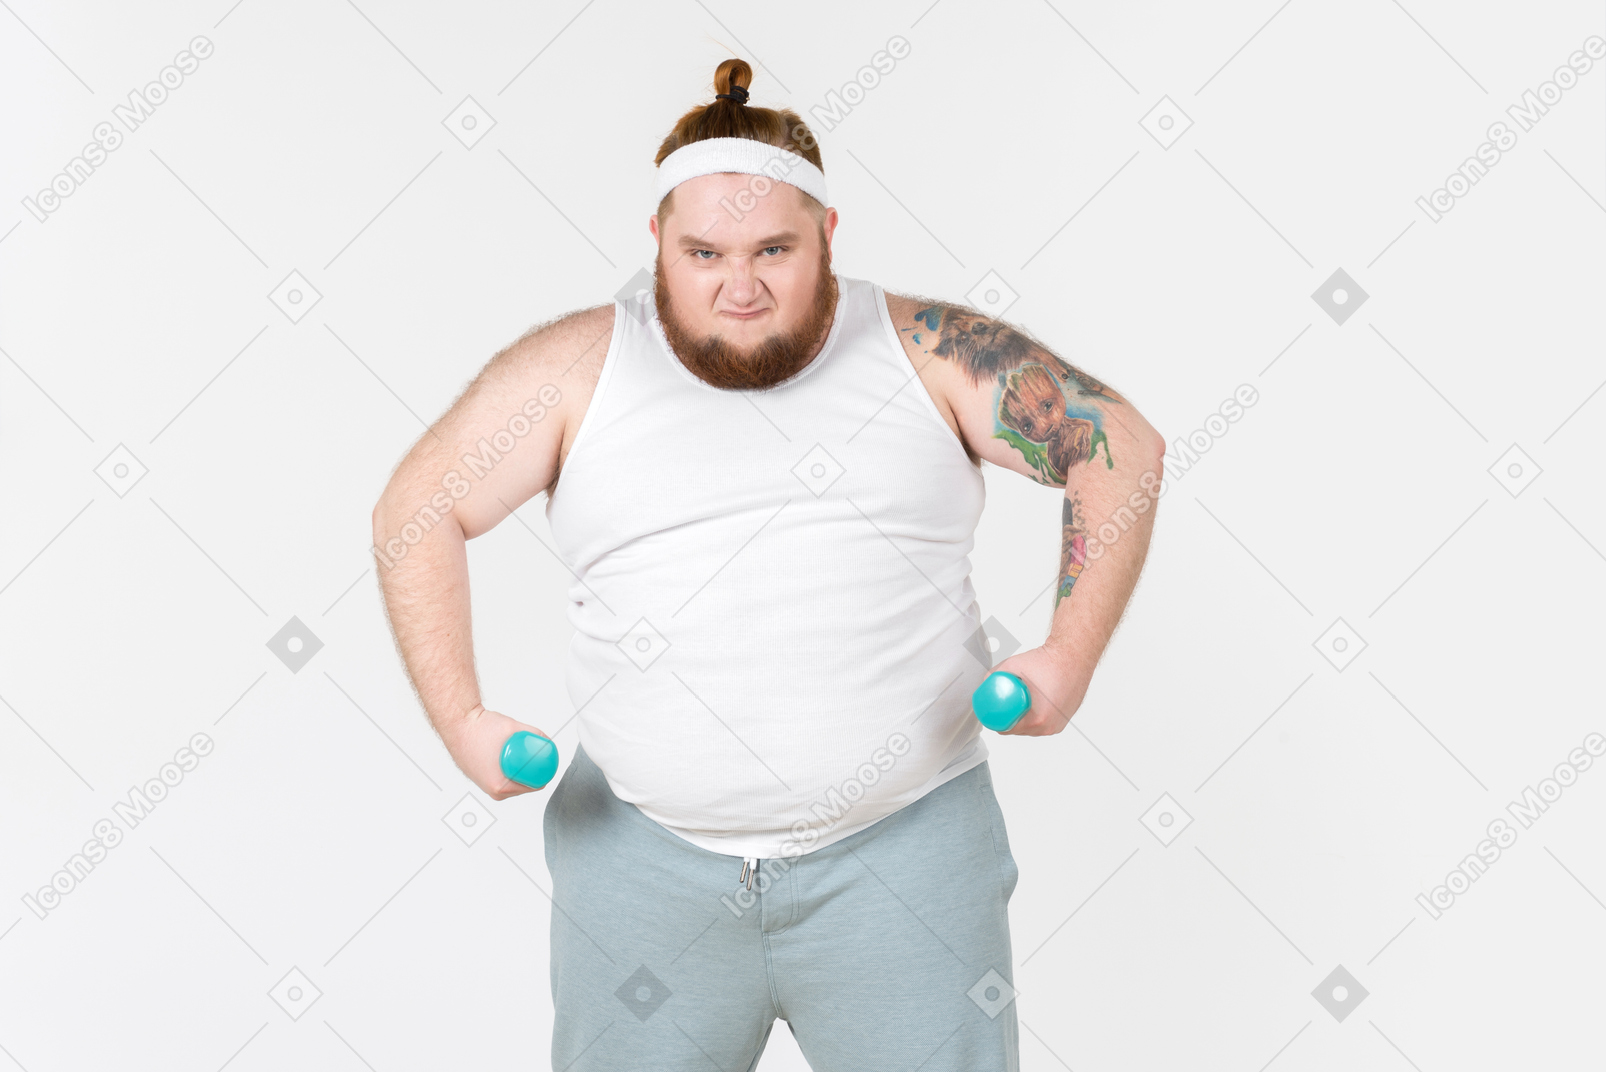 Angry looking big guy in sportswear lifting hand weights